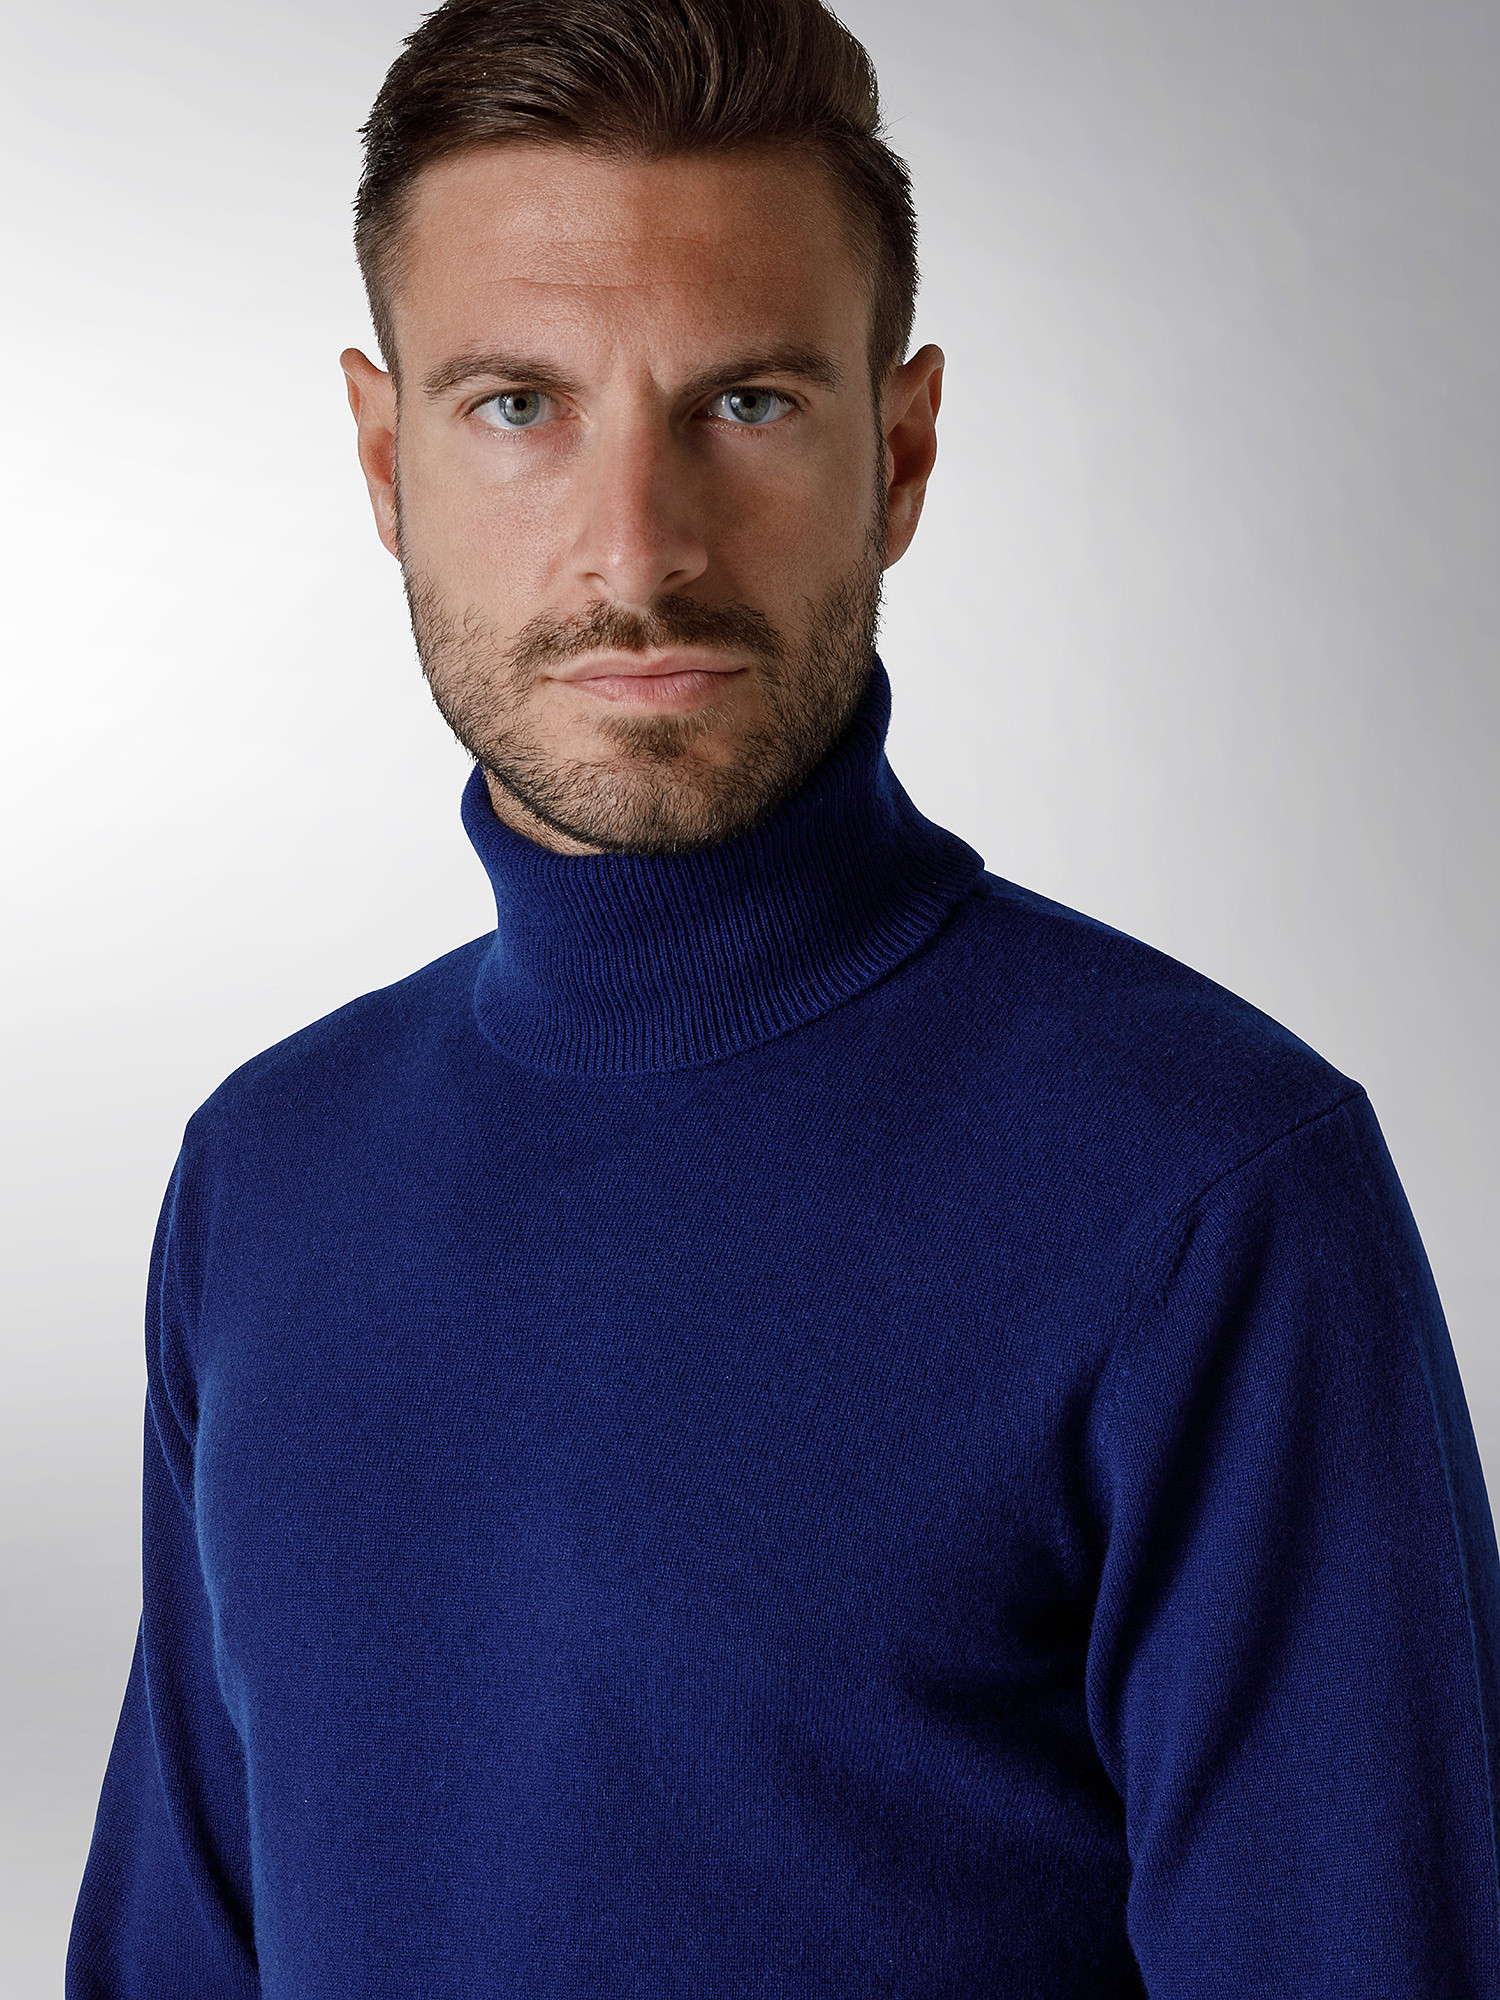 Coin Cashmere - Turtleneck in pure premium cashmere, Royal Blue, large image number 3